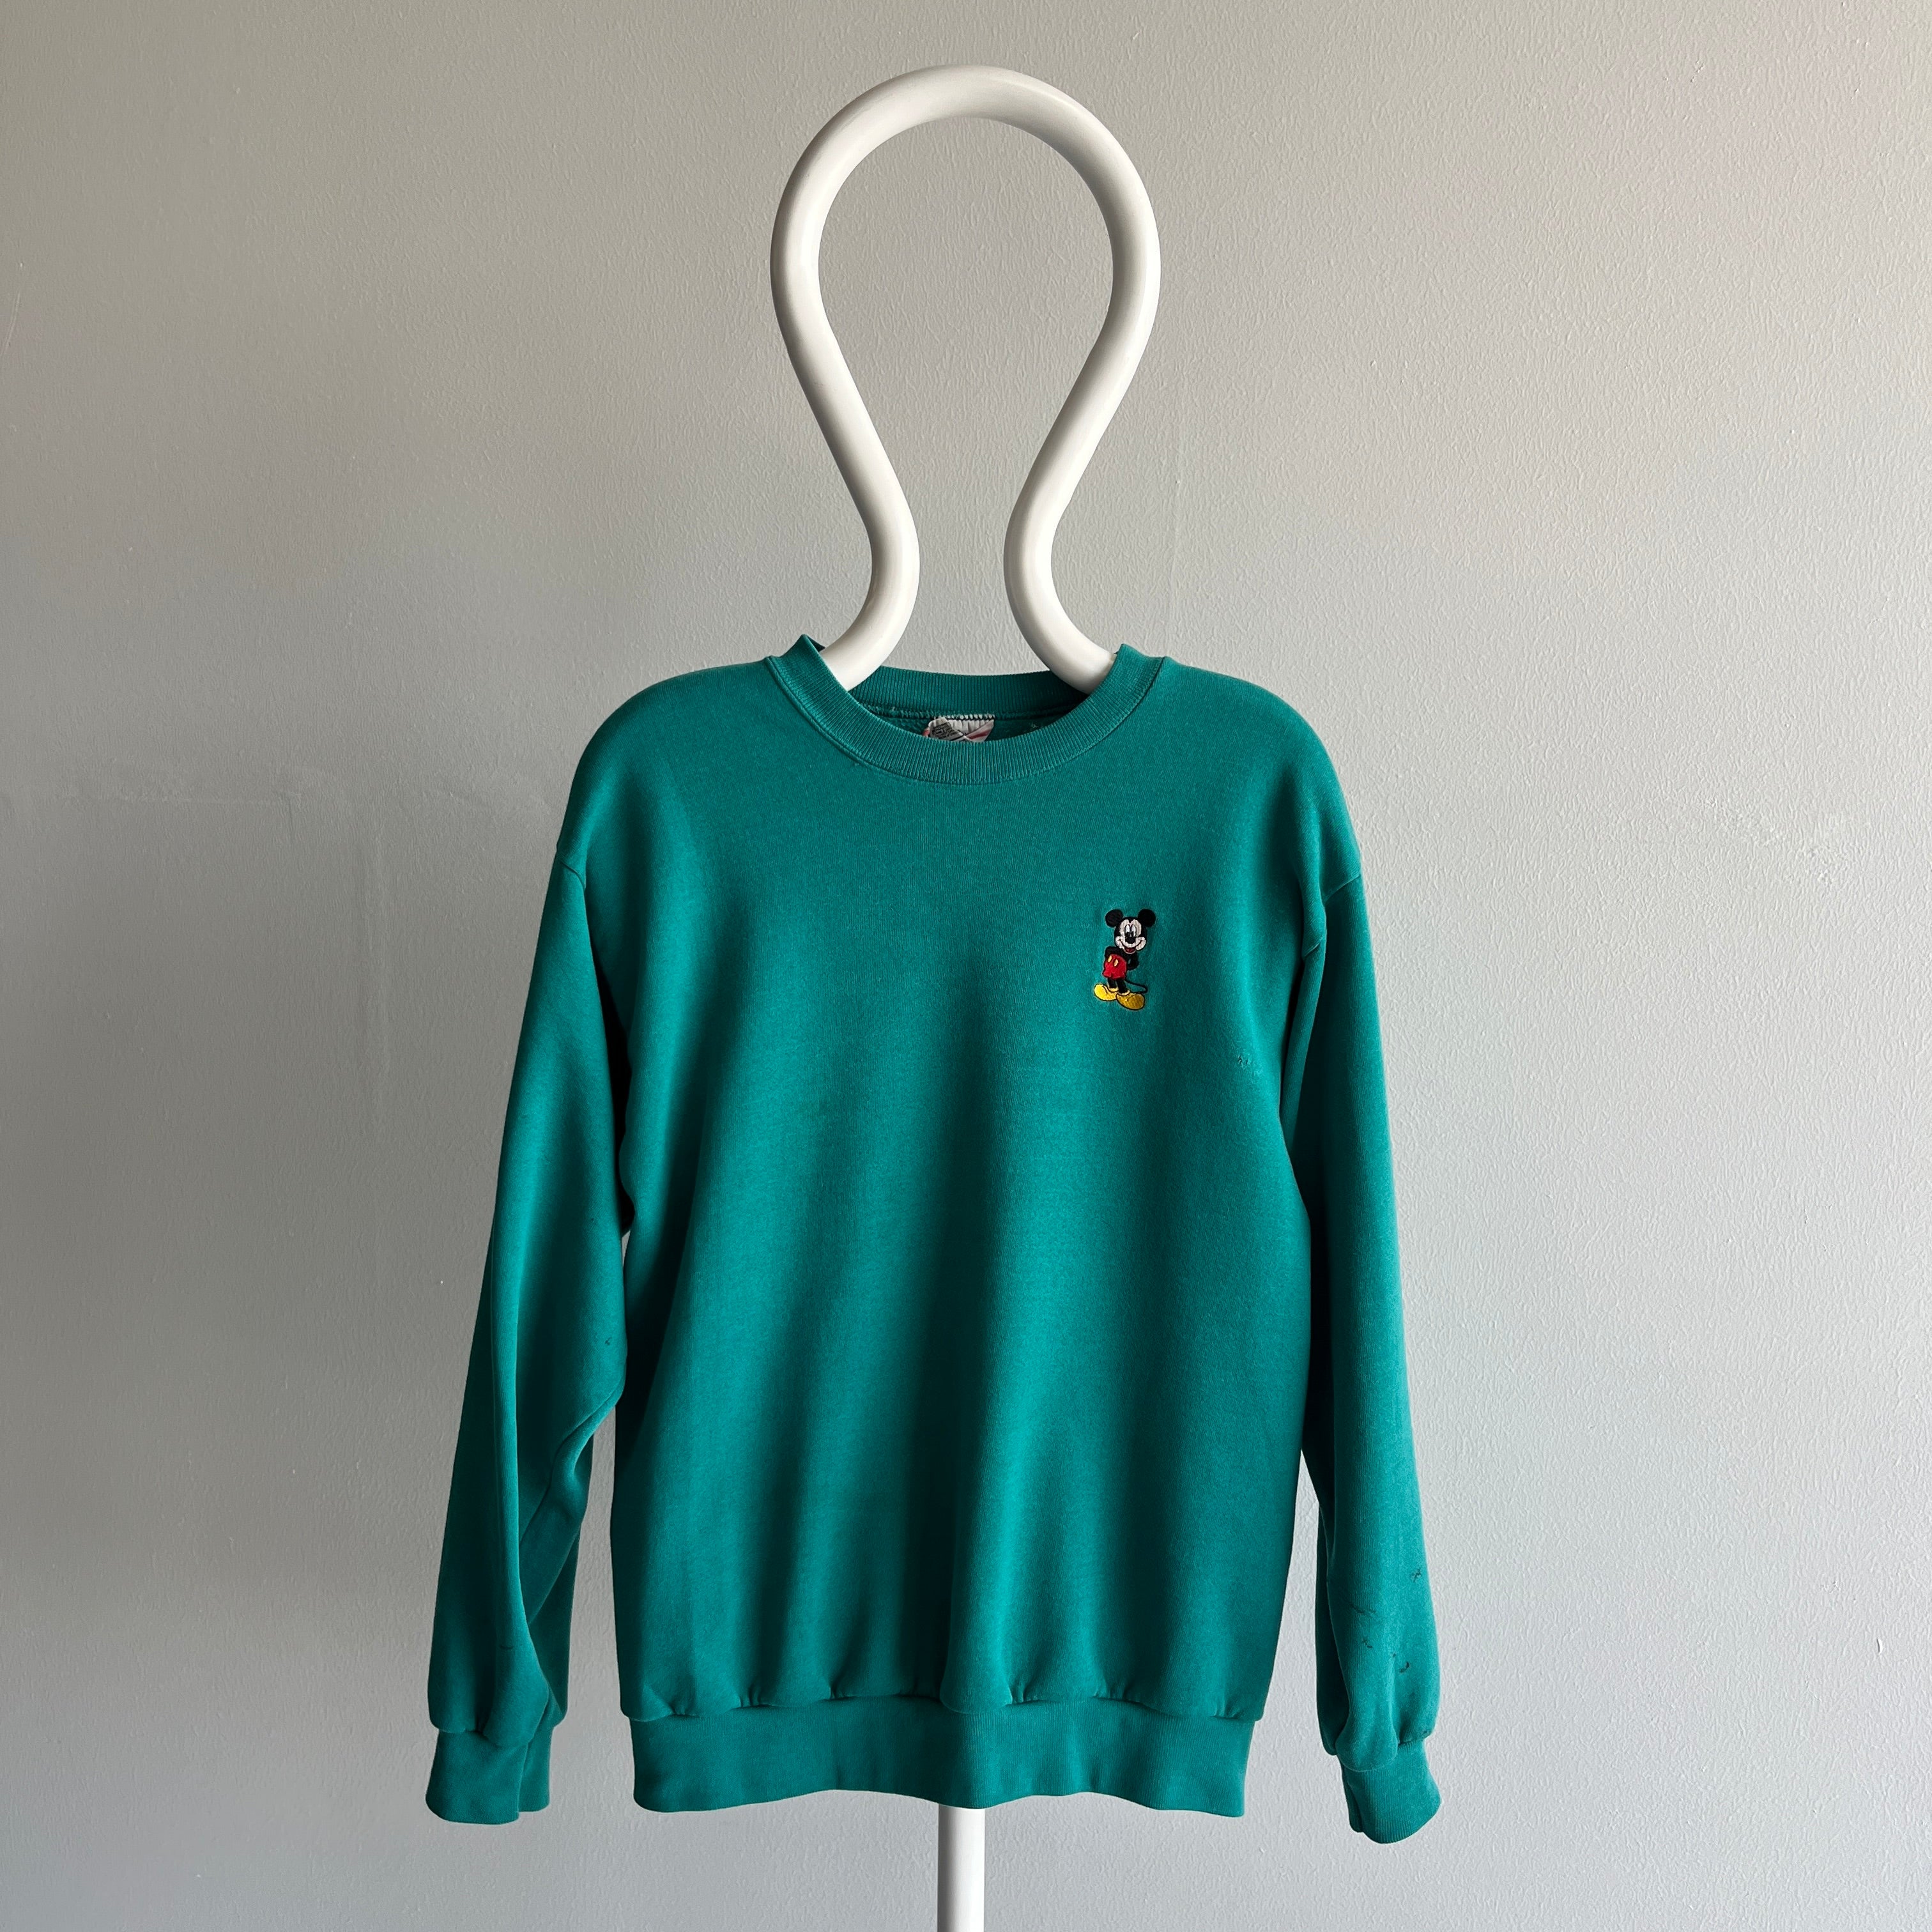 1980/90s Mickey Mouse Sweatshirt with Faint Staining